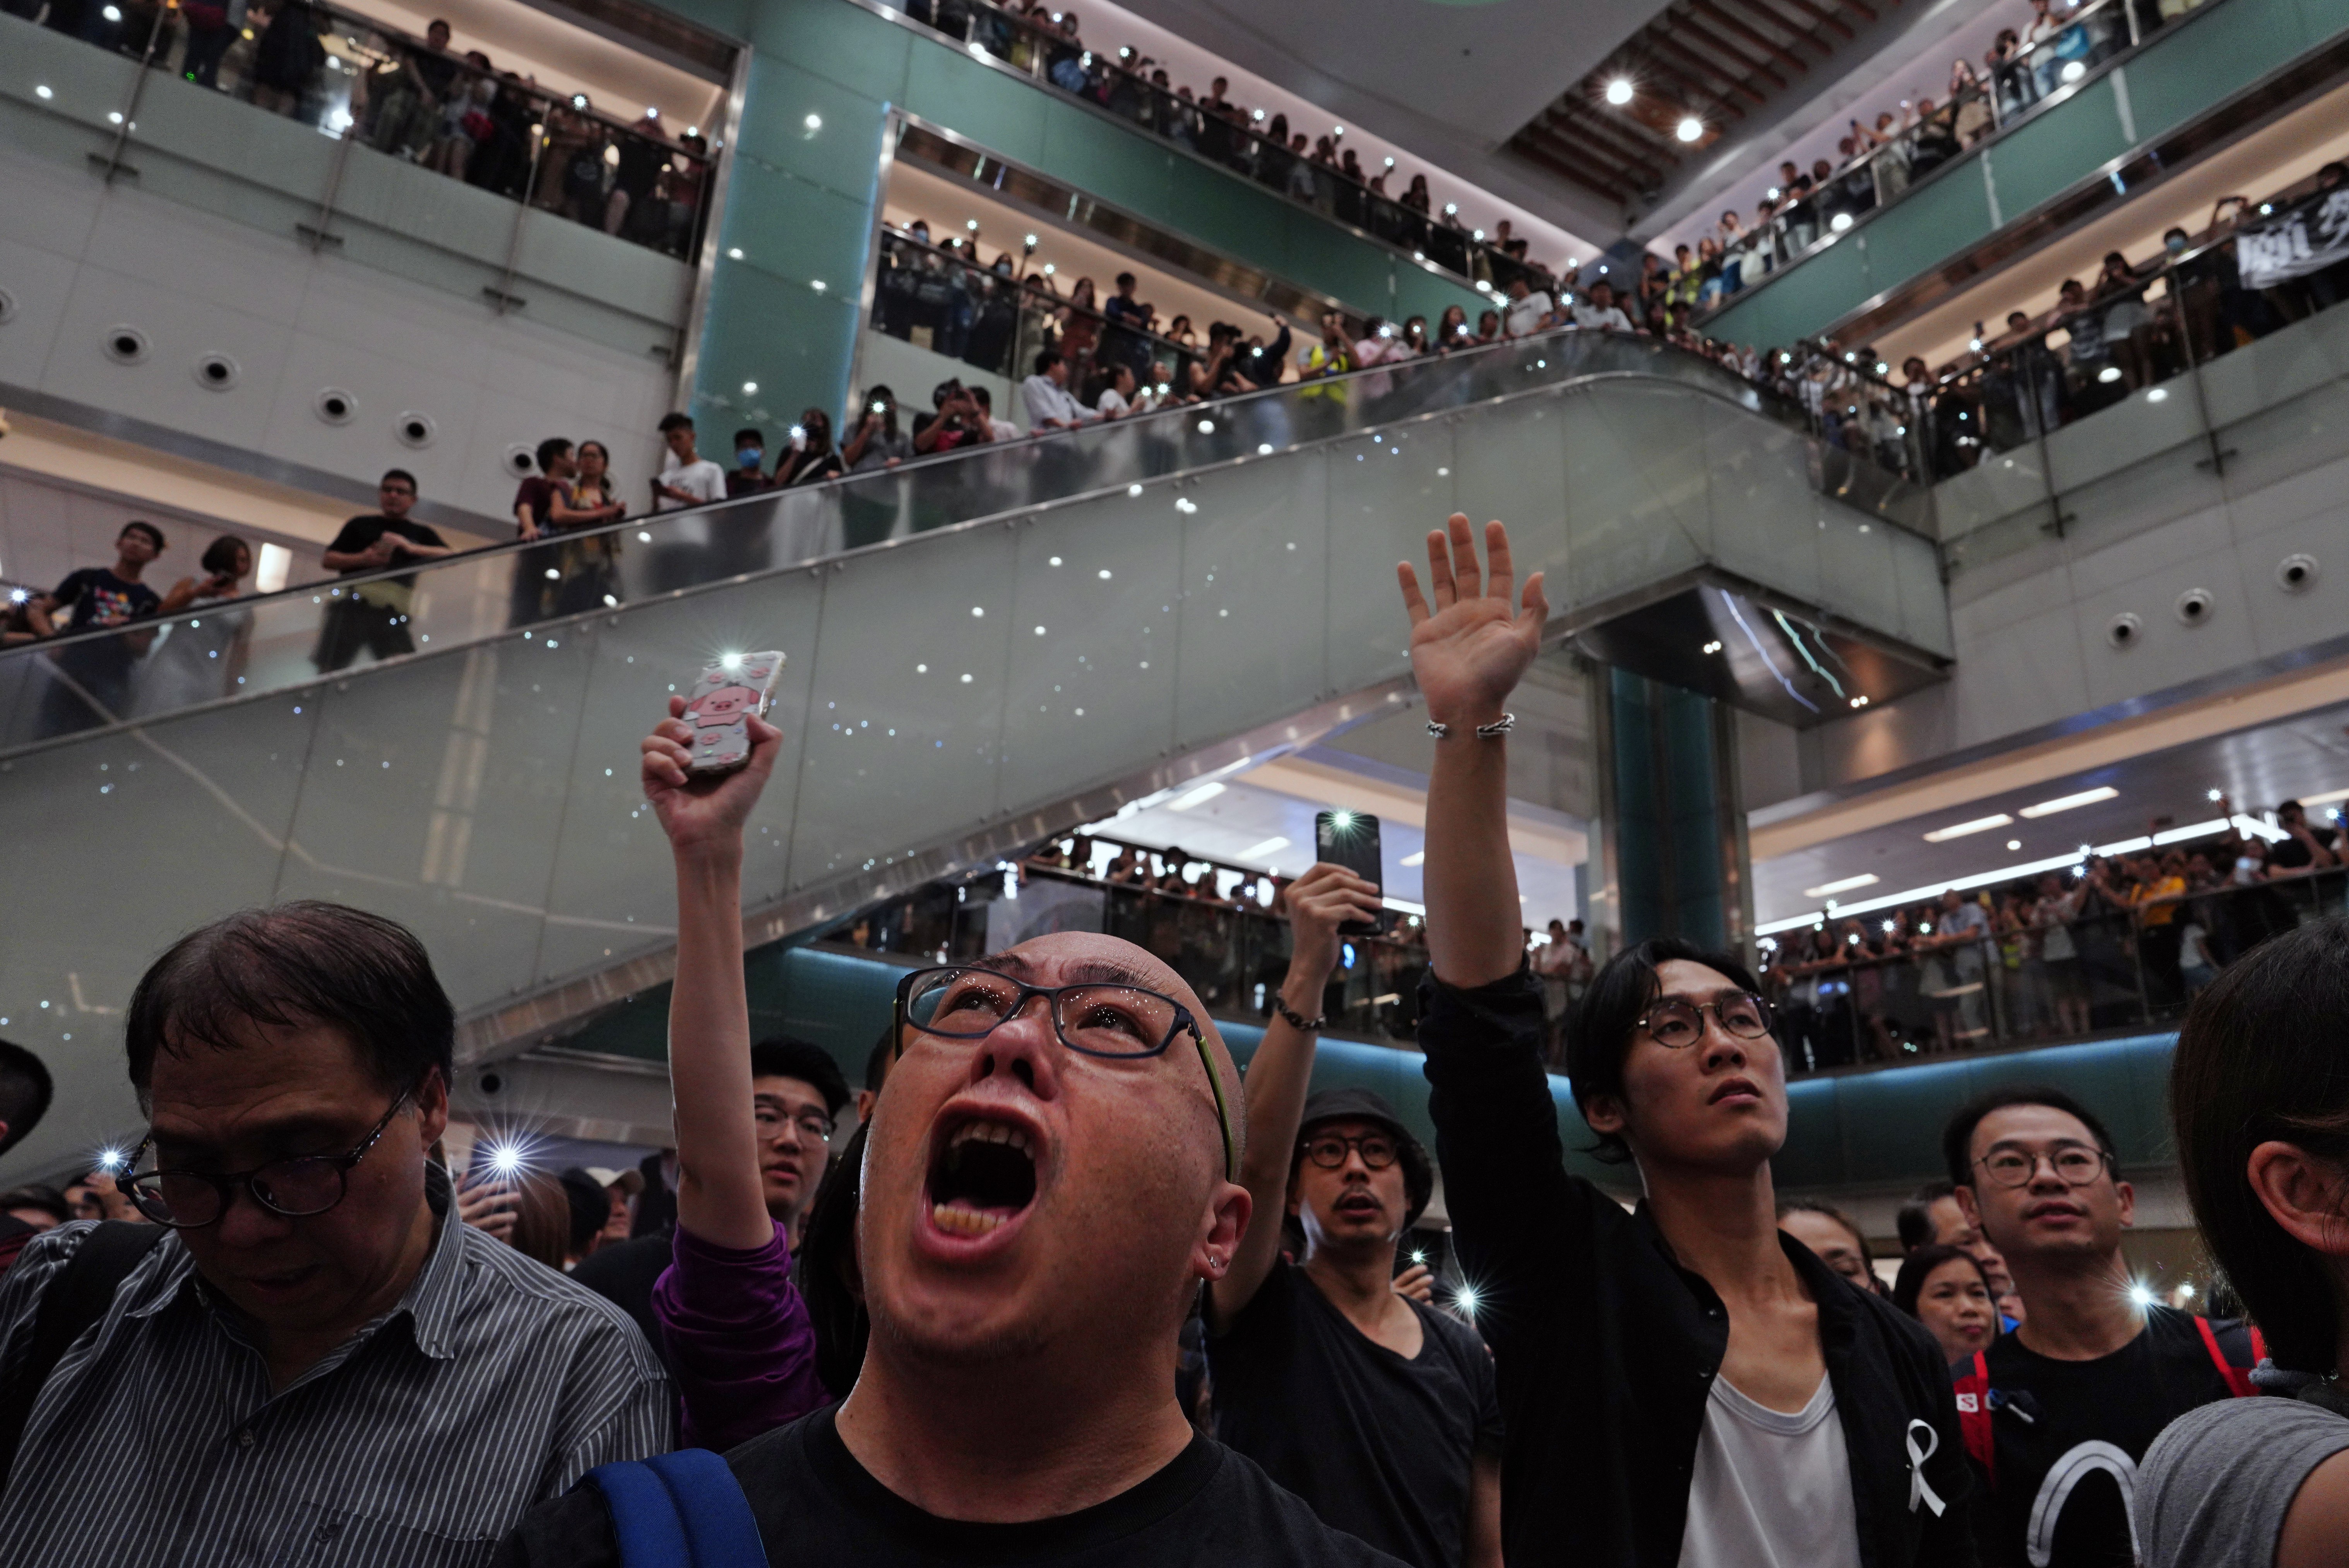 People sing Glory to Hong Kong in a shopping mall in the city earlier this month. Crowds have gathered in several malls to sing the song, which has become the anthem of anti-government protests that have rocked Hong Kong since June. Photo: AP